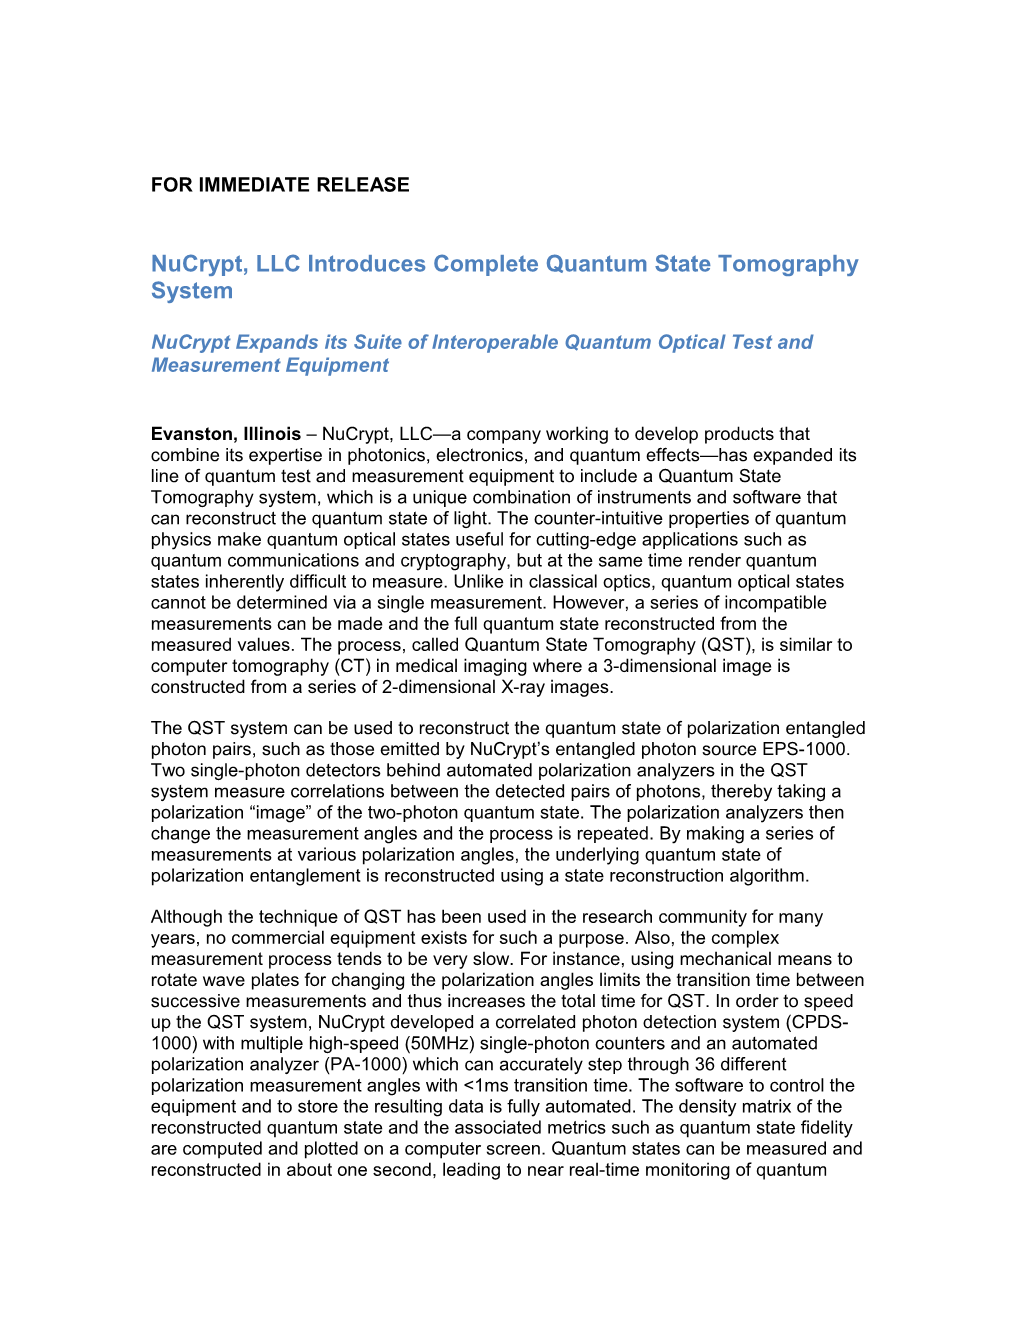 Nucrypt, LLC Introduces Complete Quantum State Tomography System